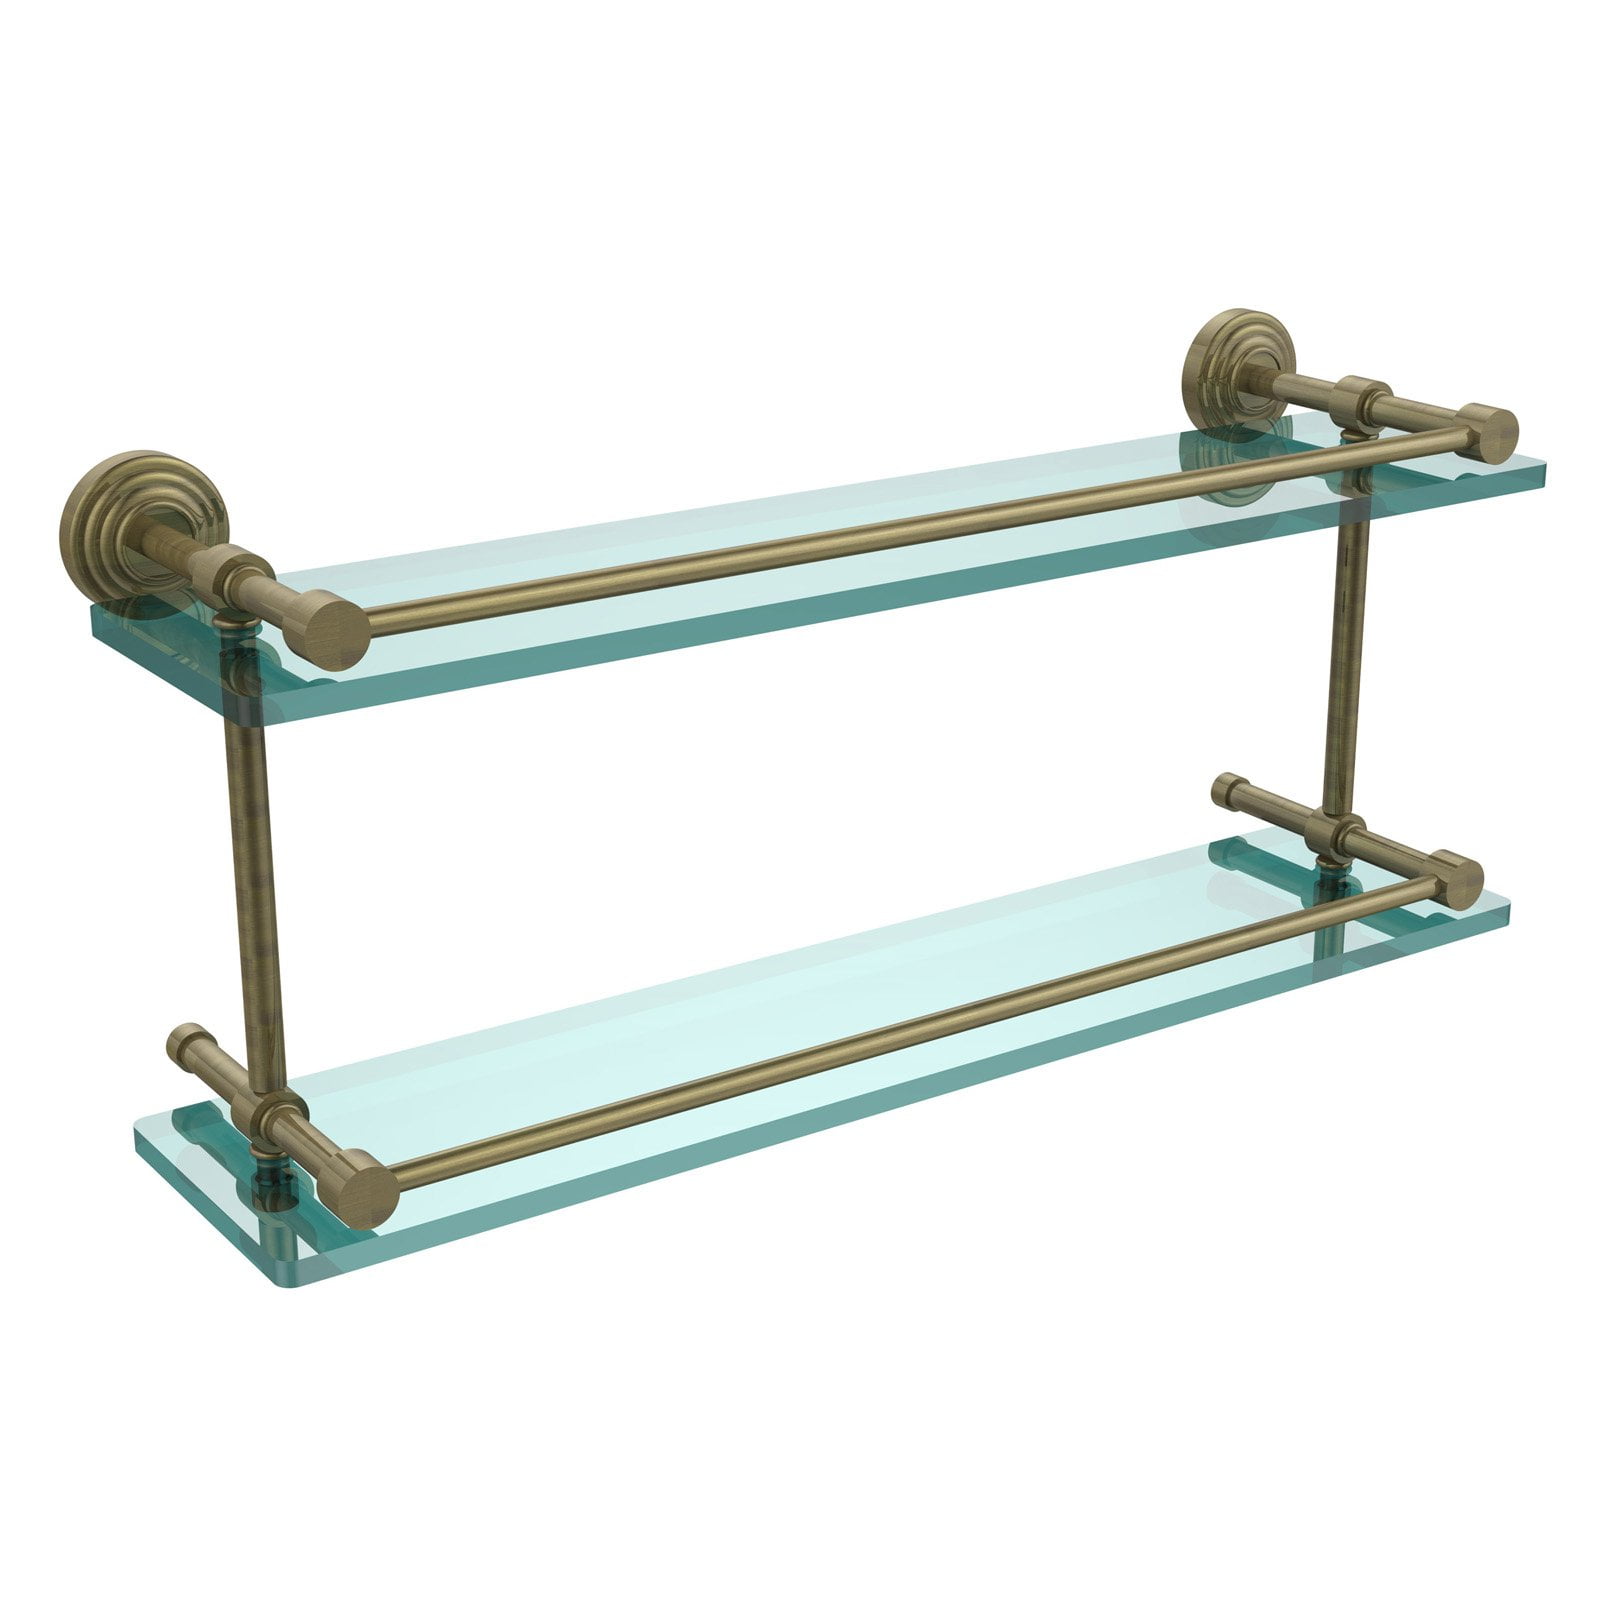 Allied Brass P1000-2/22-GAL-CA 22-Inch Tempered Double Glass Shelf with Gallery Rail Antique Copper 